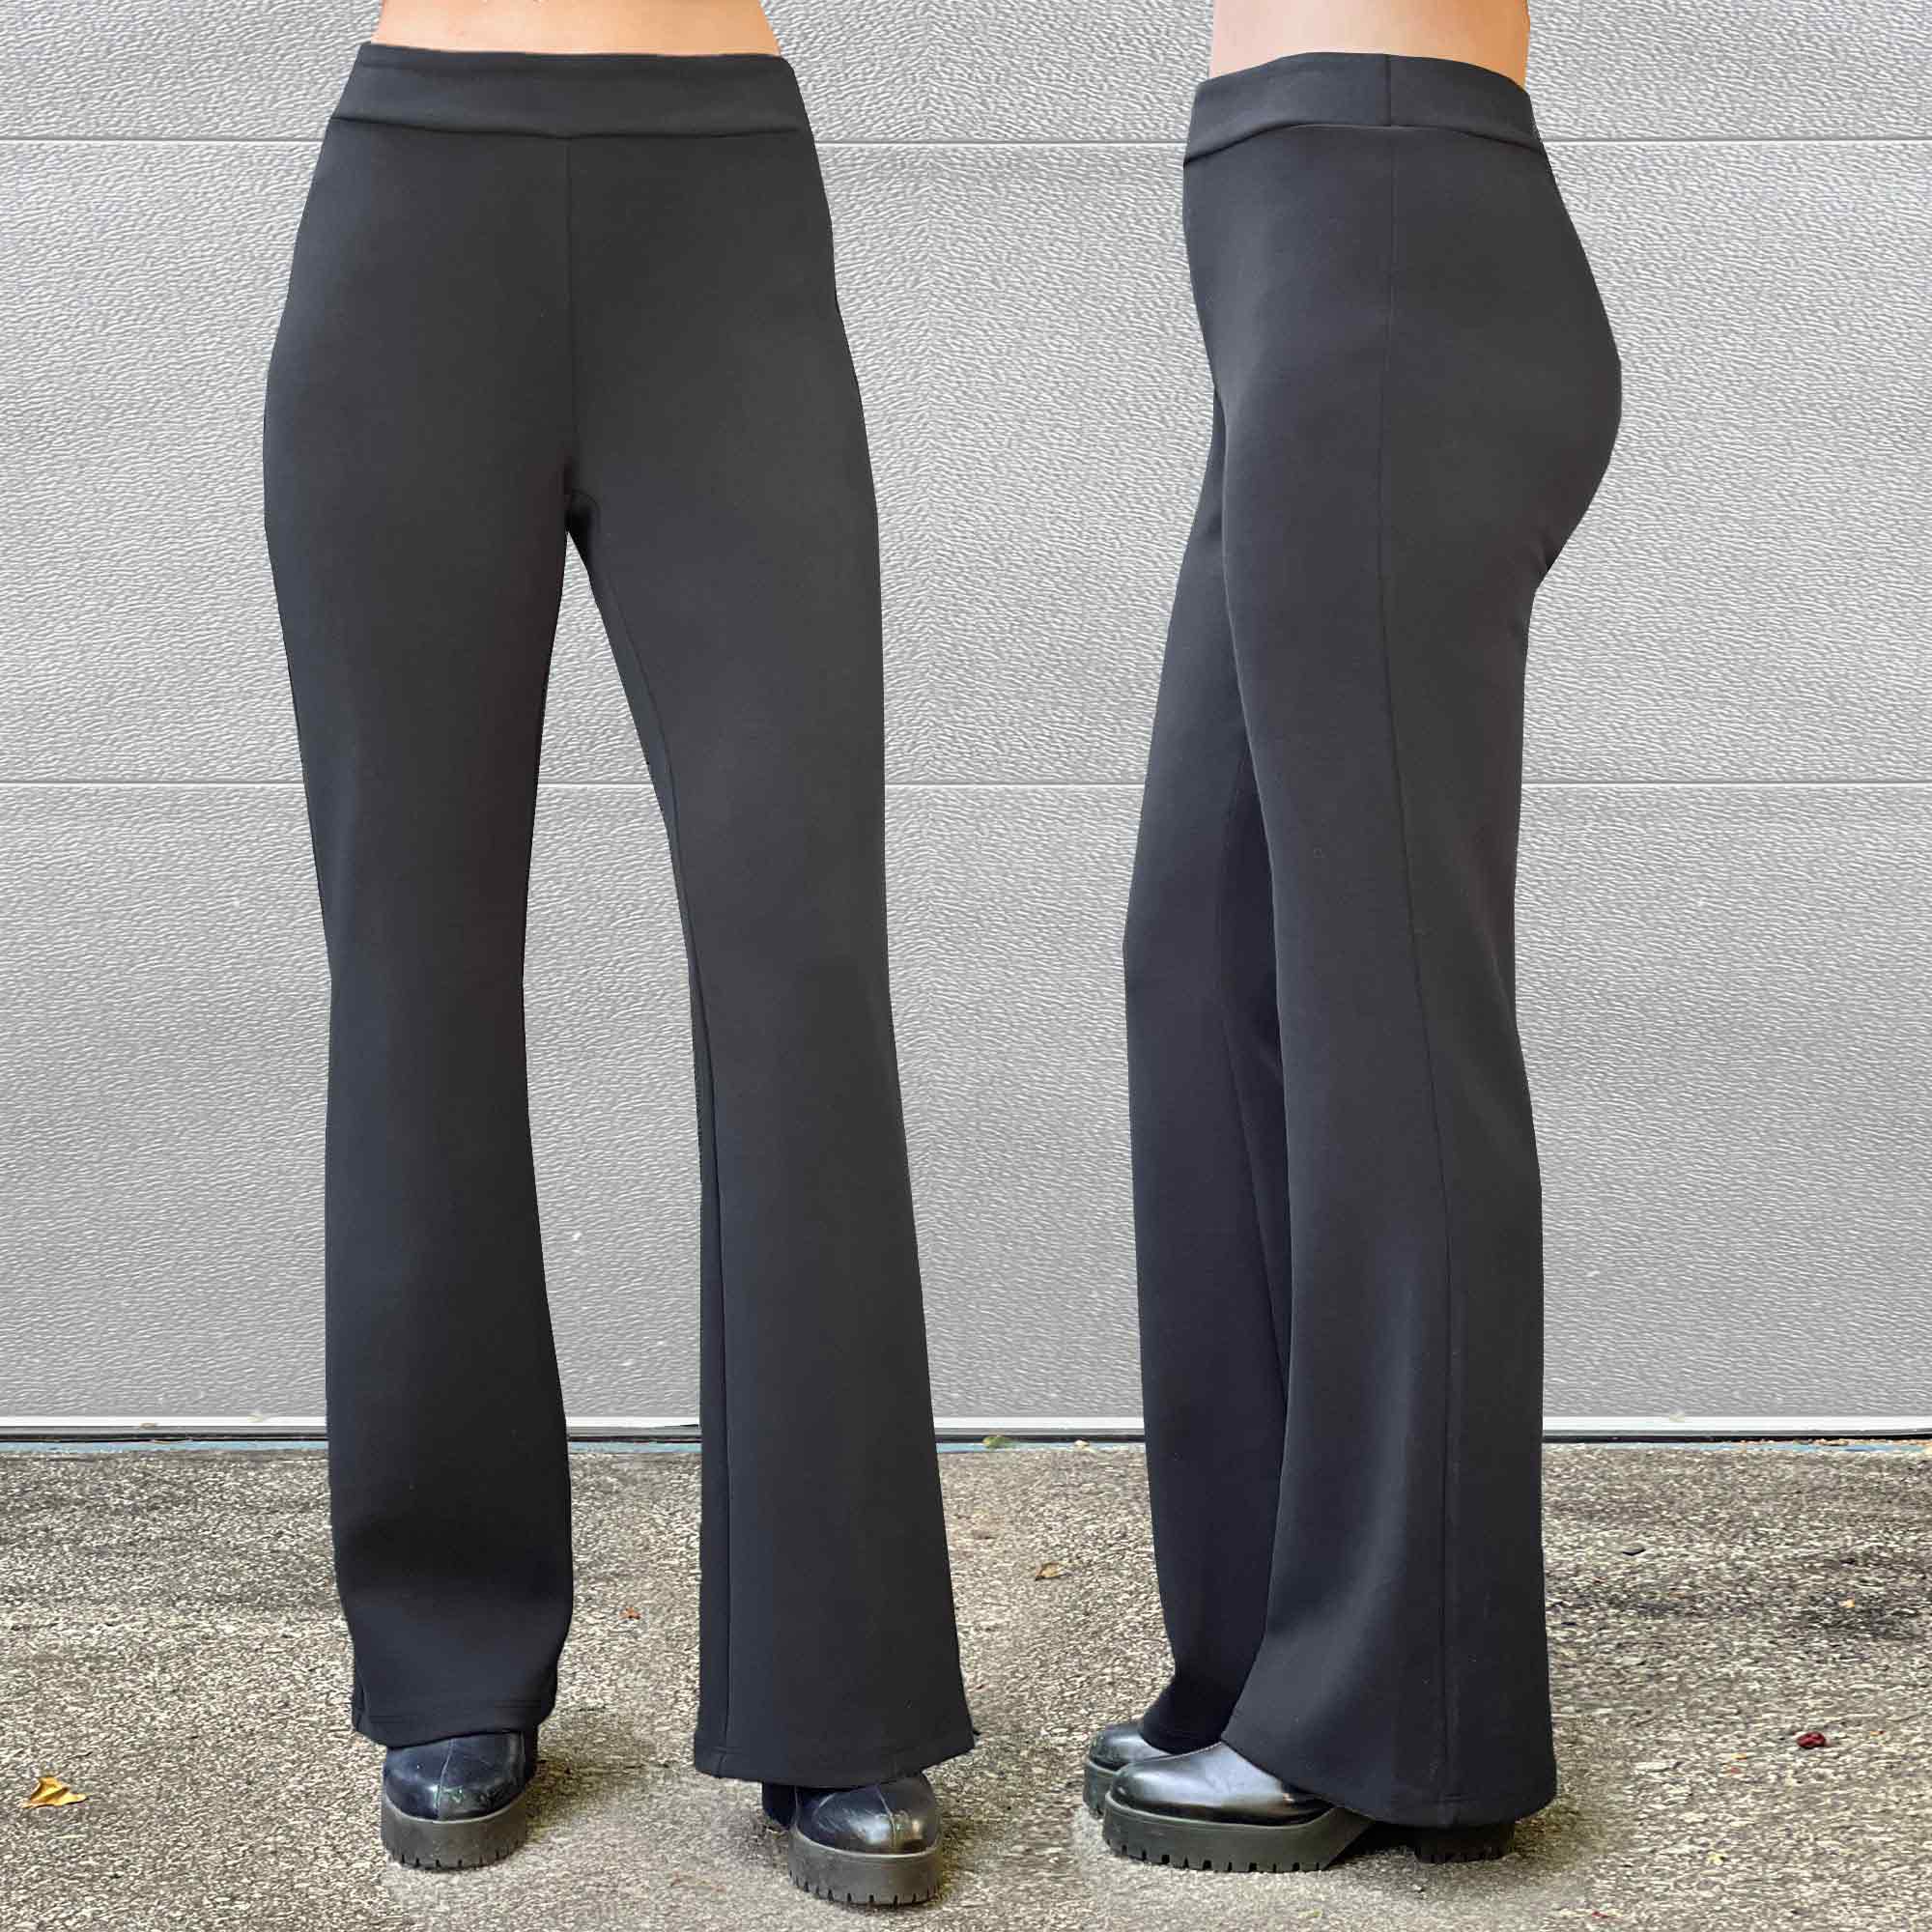 Laney mid-rise flare pant, Sustainable women's clothing made in Canada